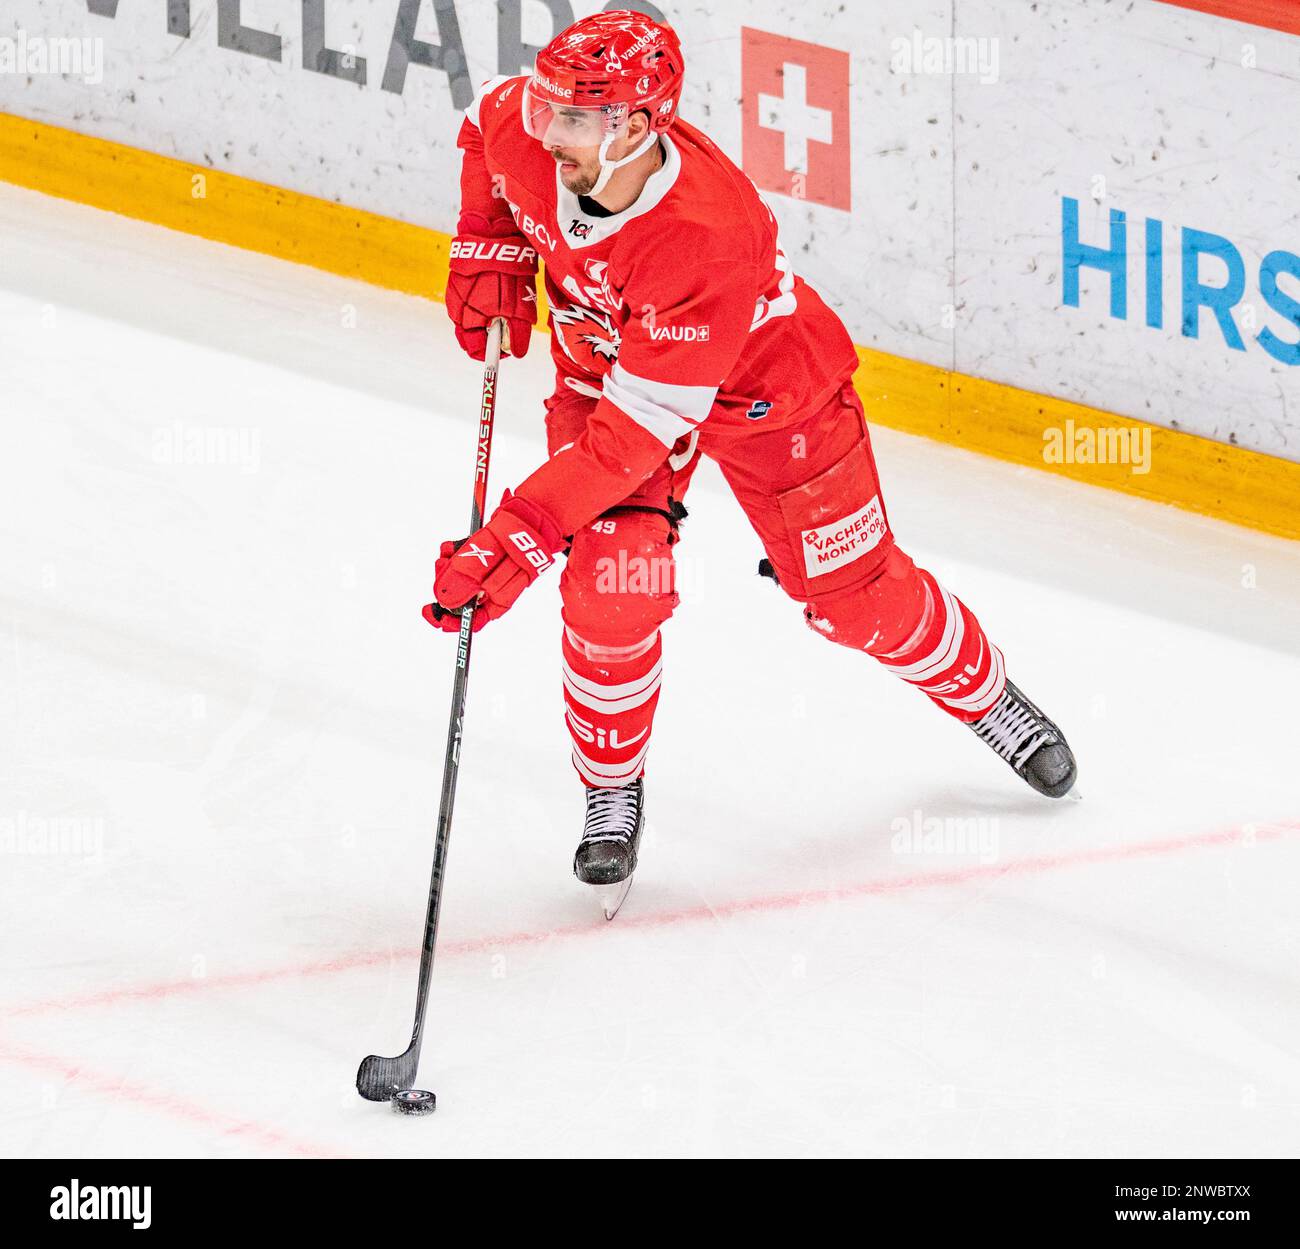 Lausanne Switzerland, 02/28/2023: Igor Jeloc of Lausanne Hc (49)  is in action during The 50th game of the regular season of the Swiss National League 2022-2023. The 50th day of the regular season between Lausanne HC and the SCRJ Lakers of Rapperswil-Jona and St. Gallen took place in the Vaudoise Arena in Lausanne. (Crédit : Eric Dubost/Alamy Live News). Stock Photo